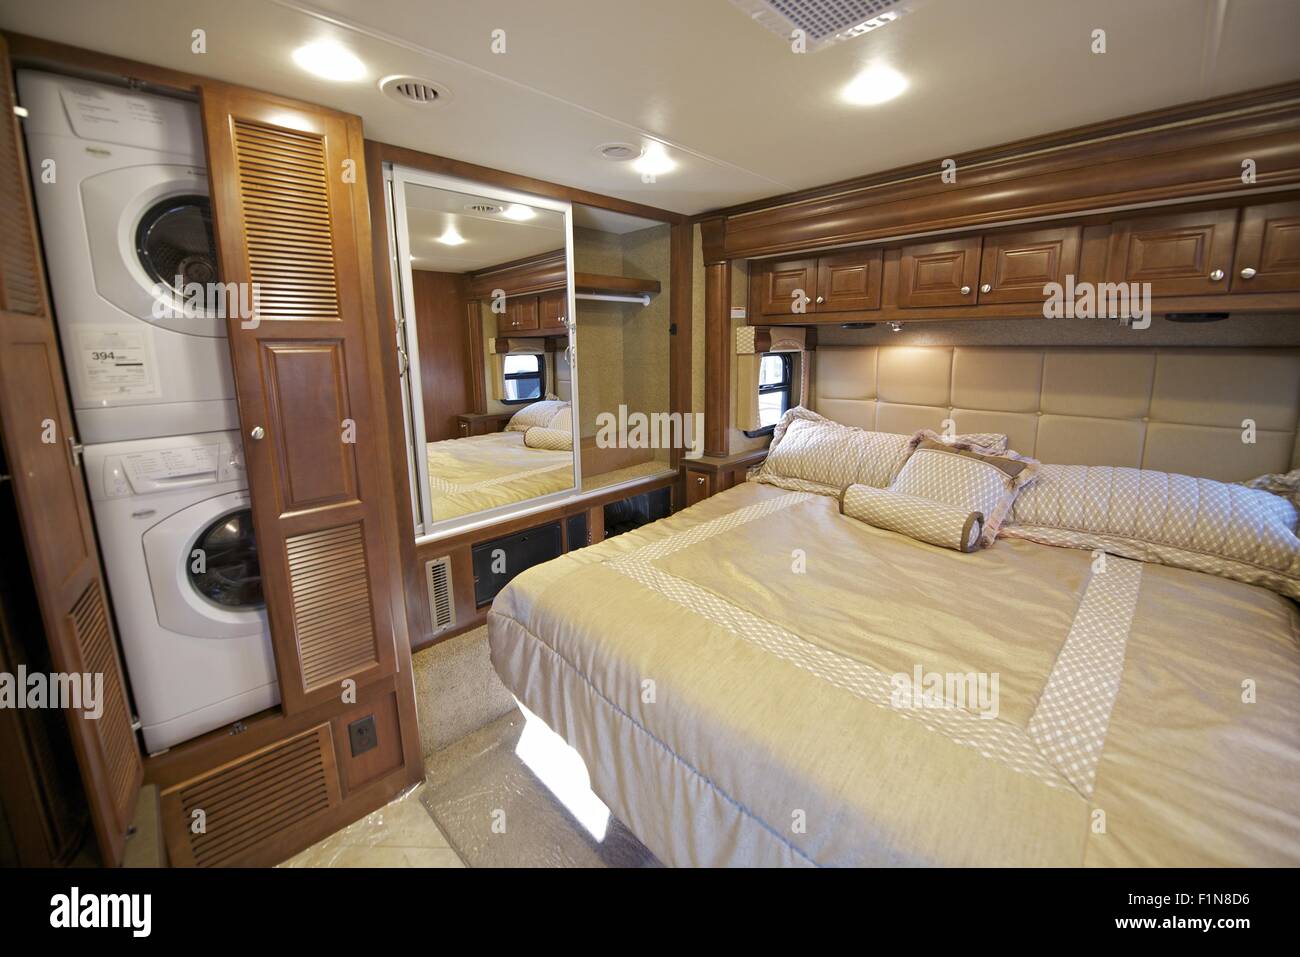 Recreation Vehicle Bedroom Interior With Washer And Dryer In